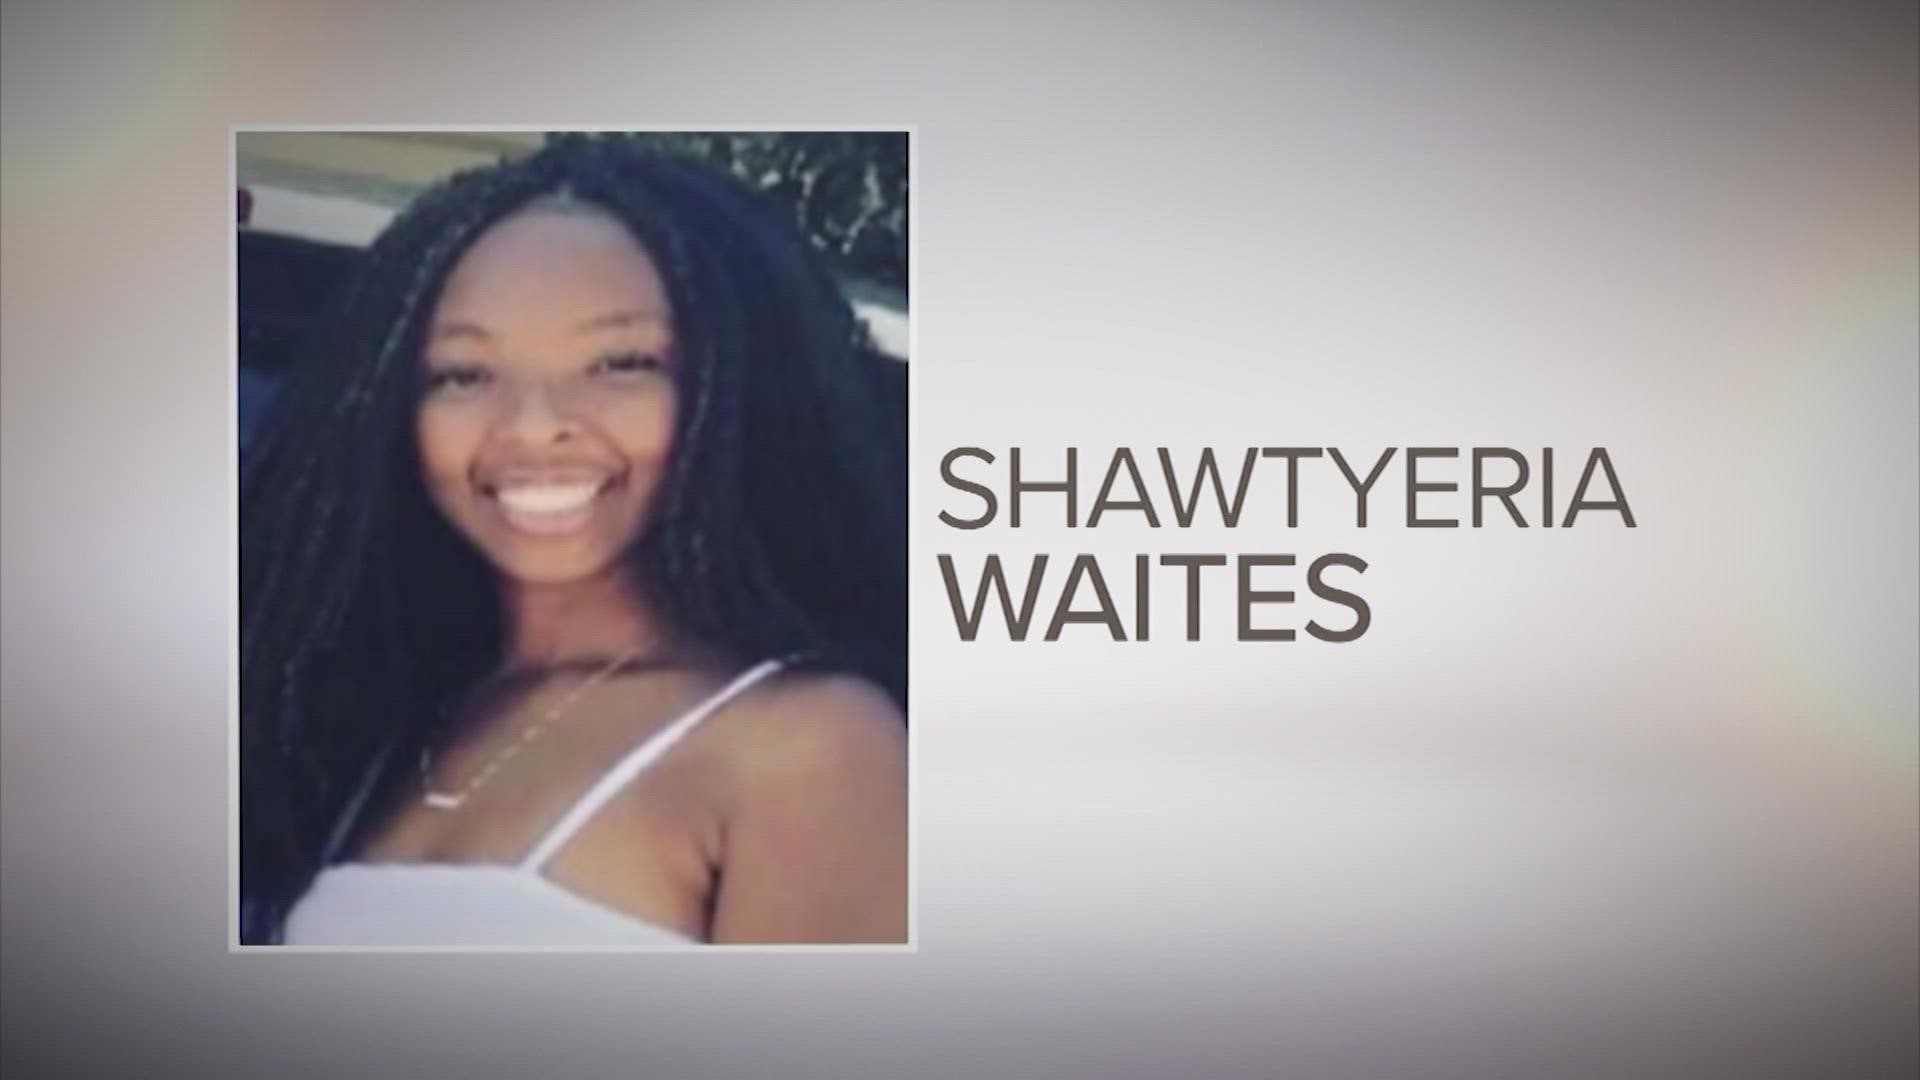 We're learning more details about the murder of Shawtyeria Waites. Court documents revealed a shovel, gas can and blood were found in the Jordan Potts' car.